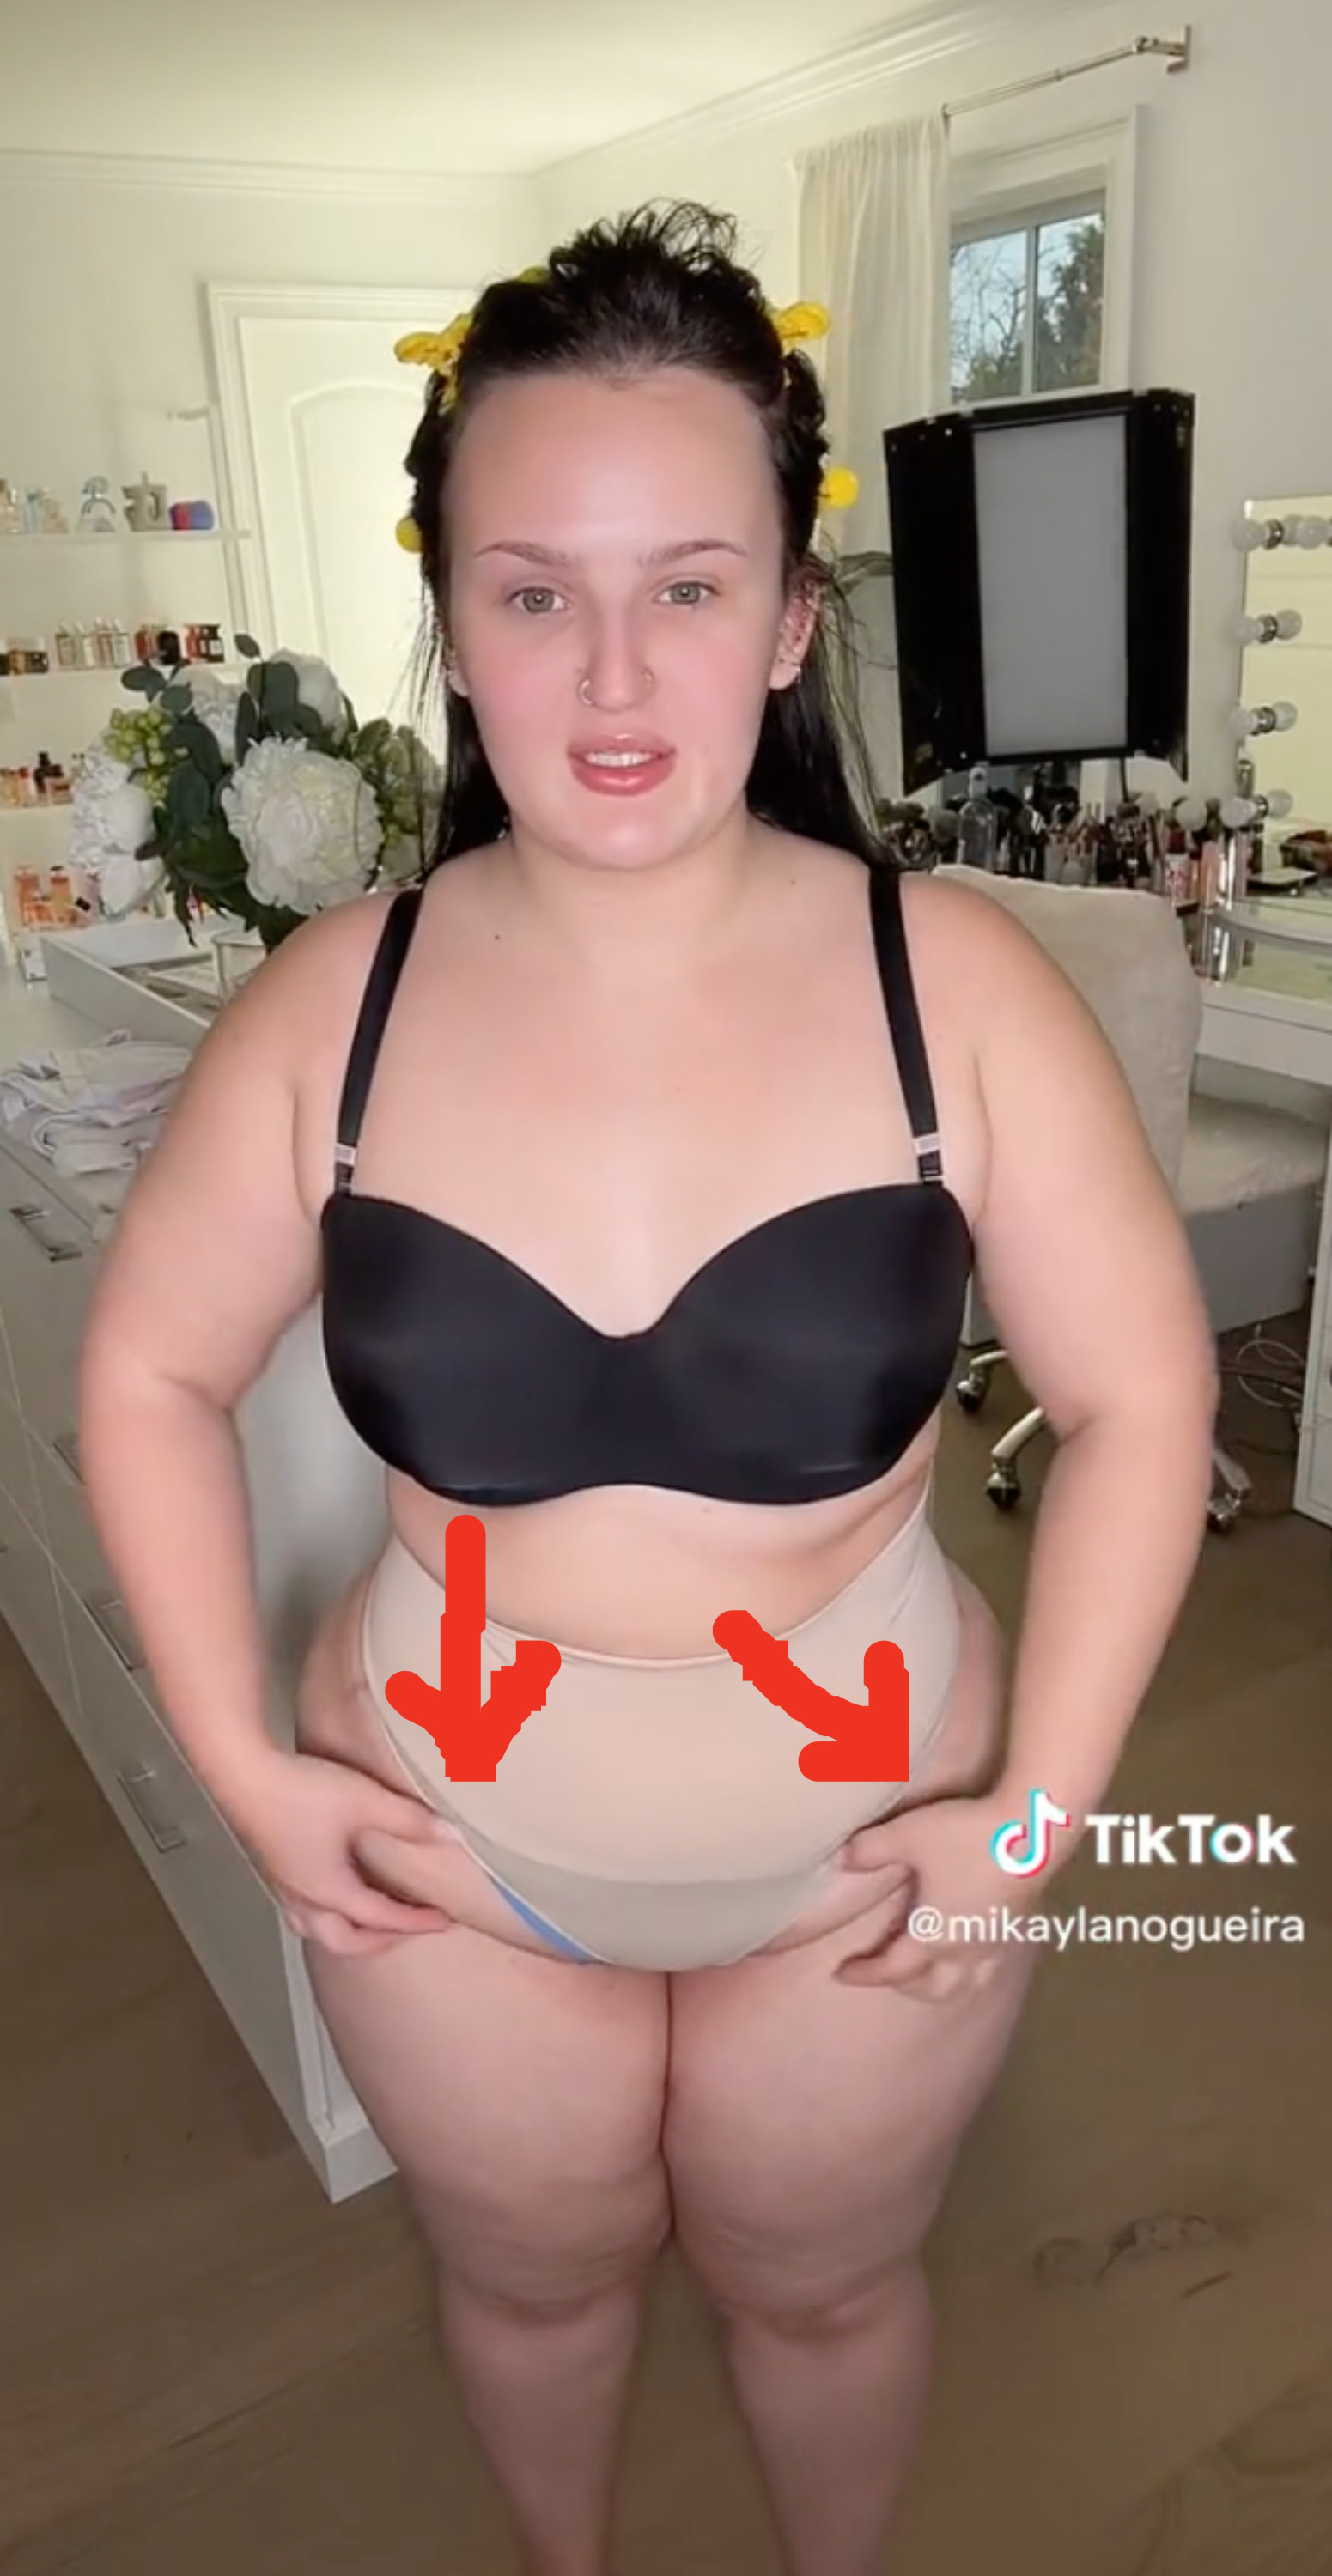 Mikayla holding onto the lower part of her stomach that&#x27;s become shaped